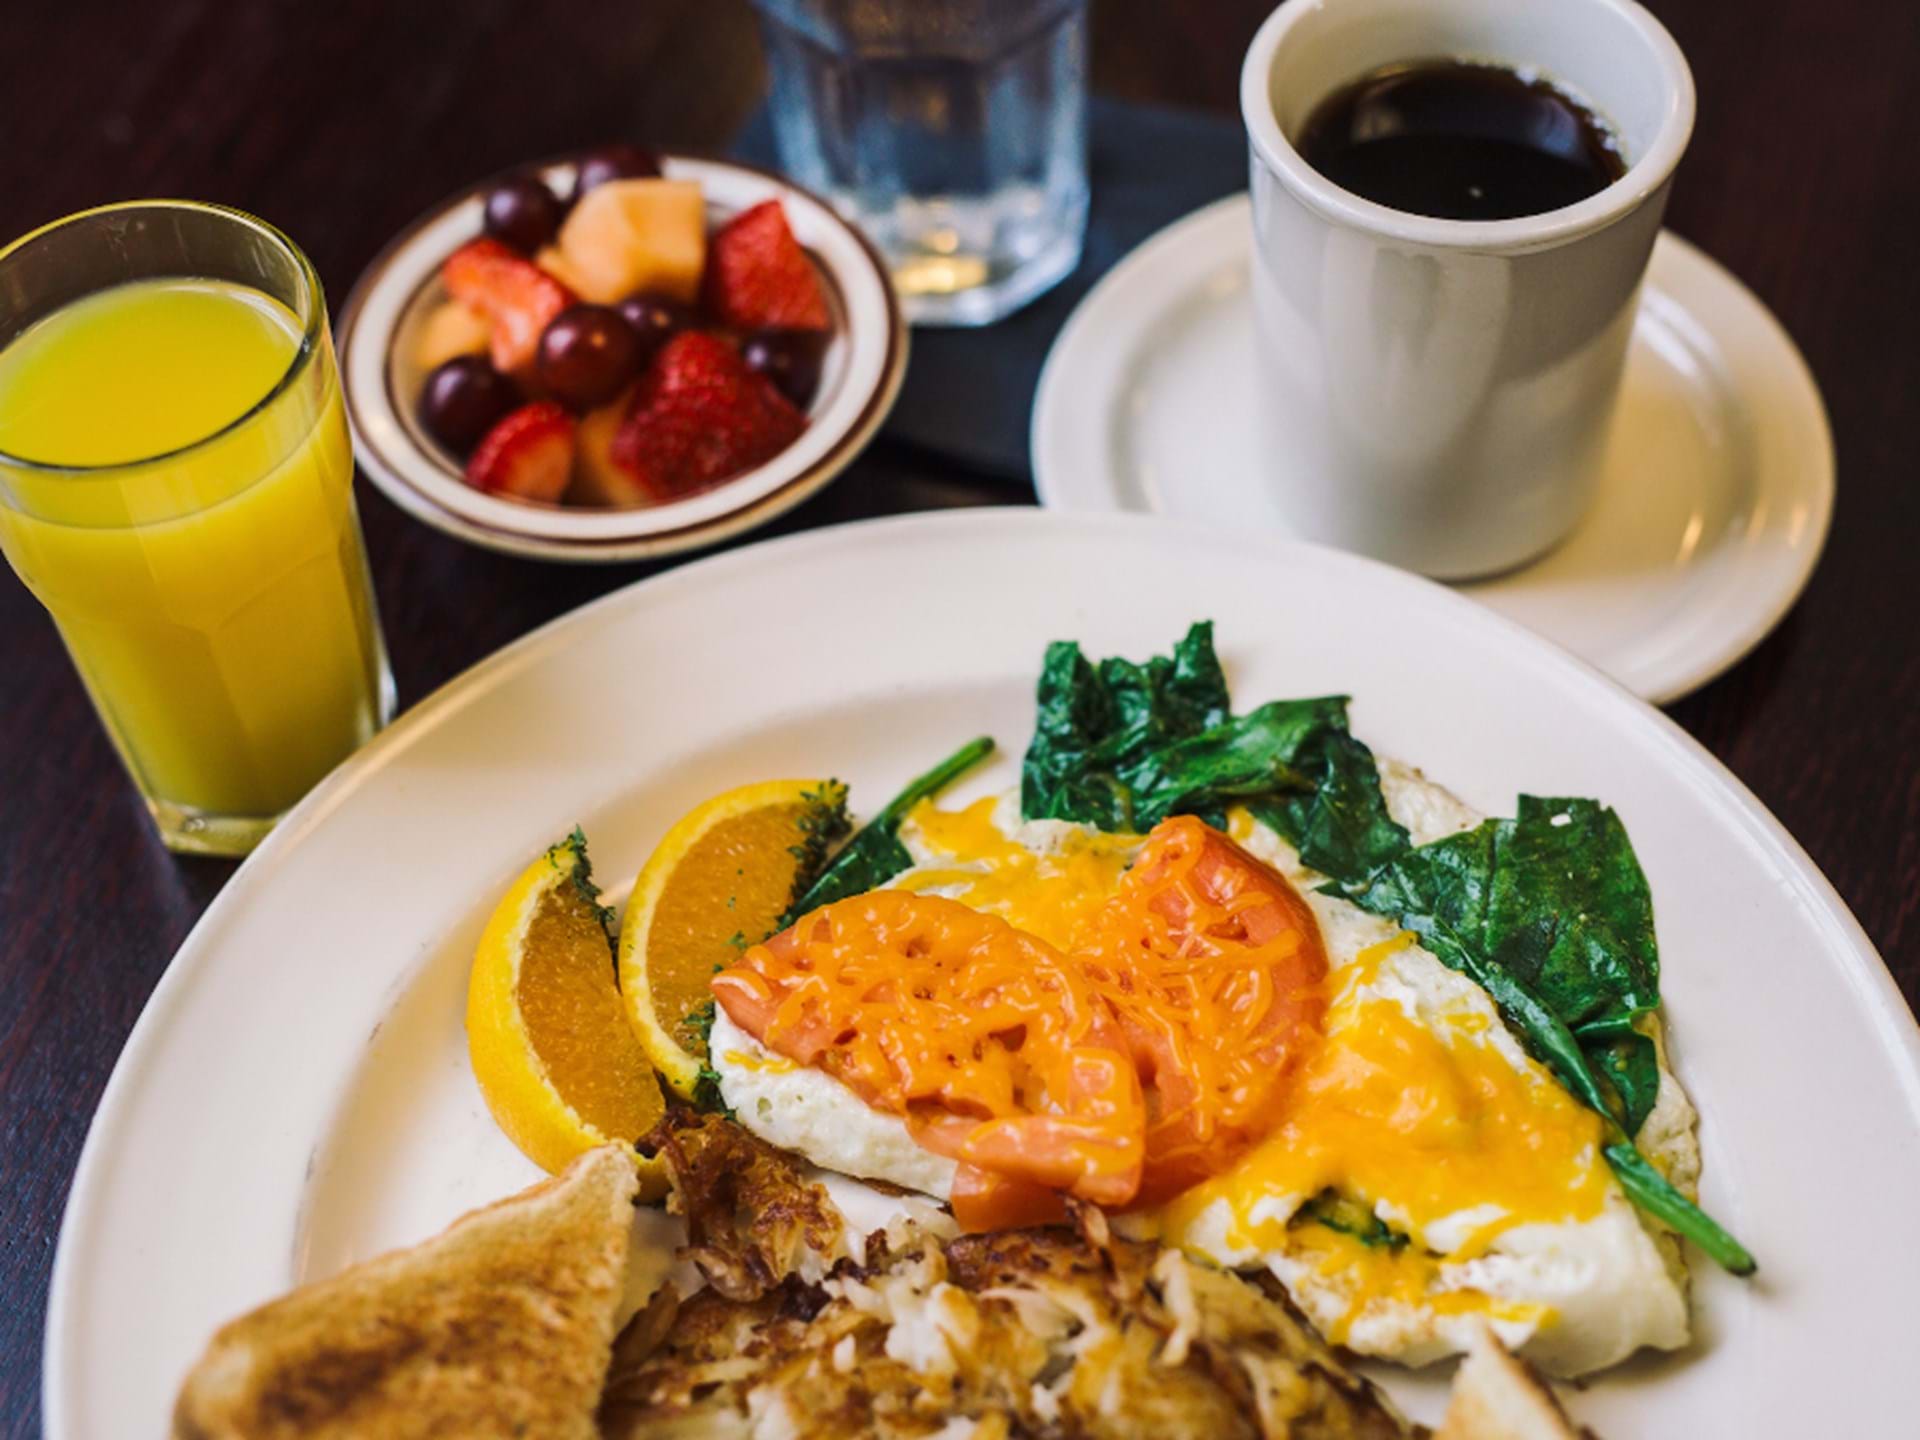 Our breakfasts are a great way to start your day.